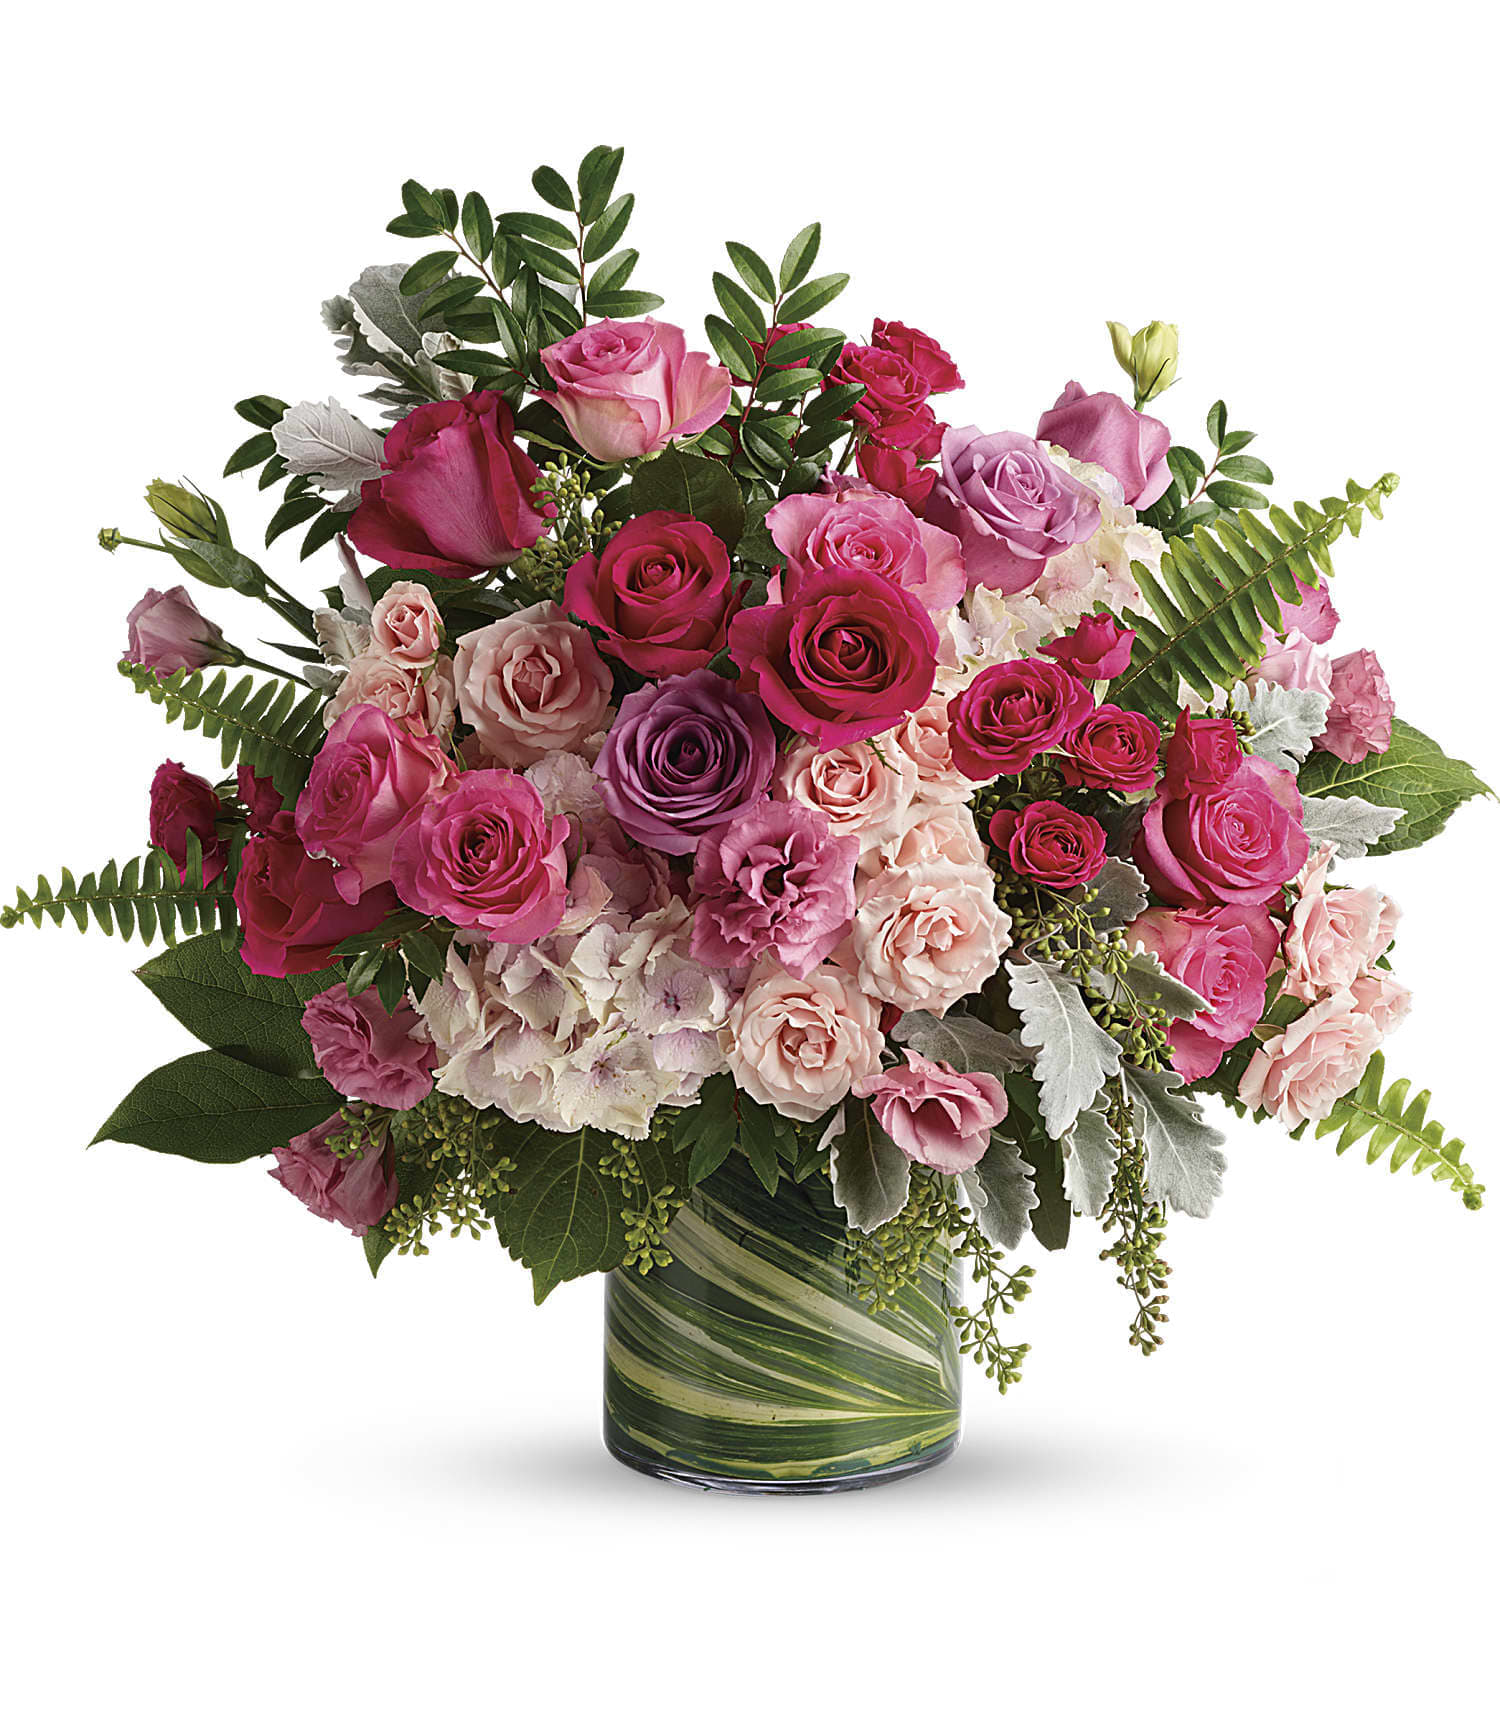 Haute Pink Bouquet 2 - A high-fashion fantasy of roses! When you want to make a grand statement, send this dreamy bouquet of posh pink roses and modern greens. 